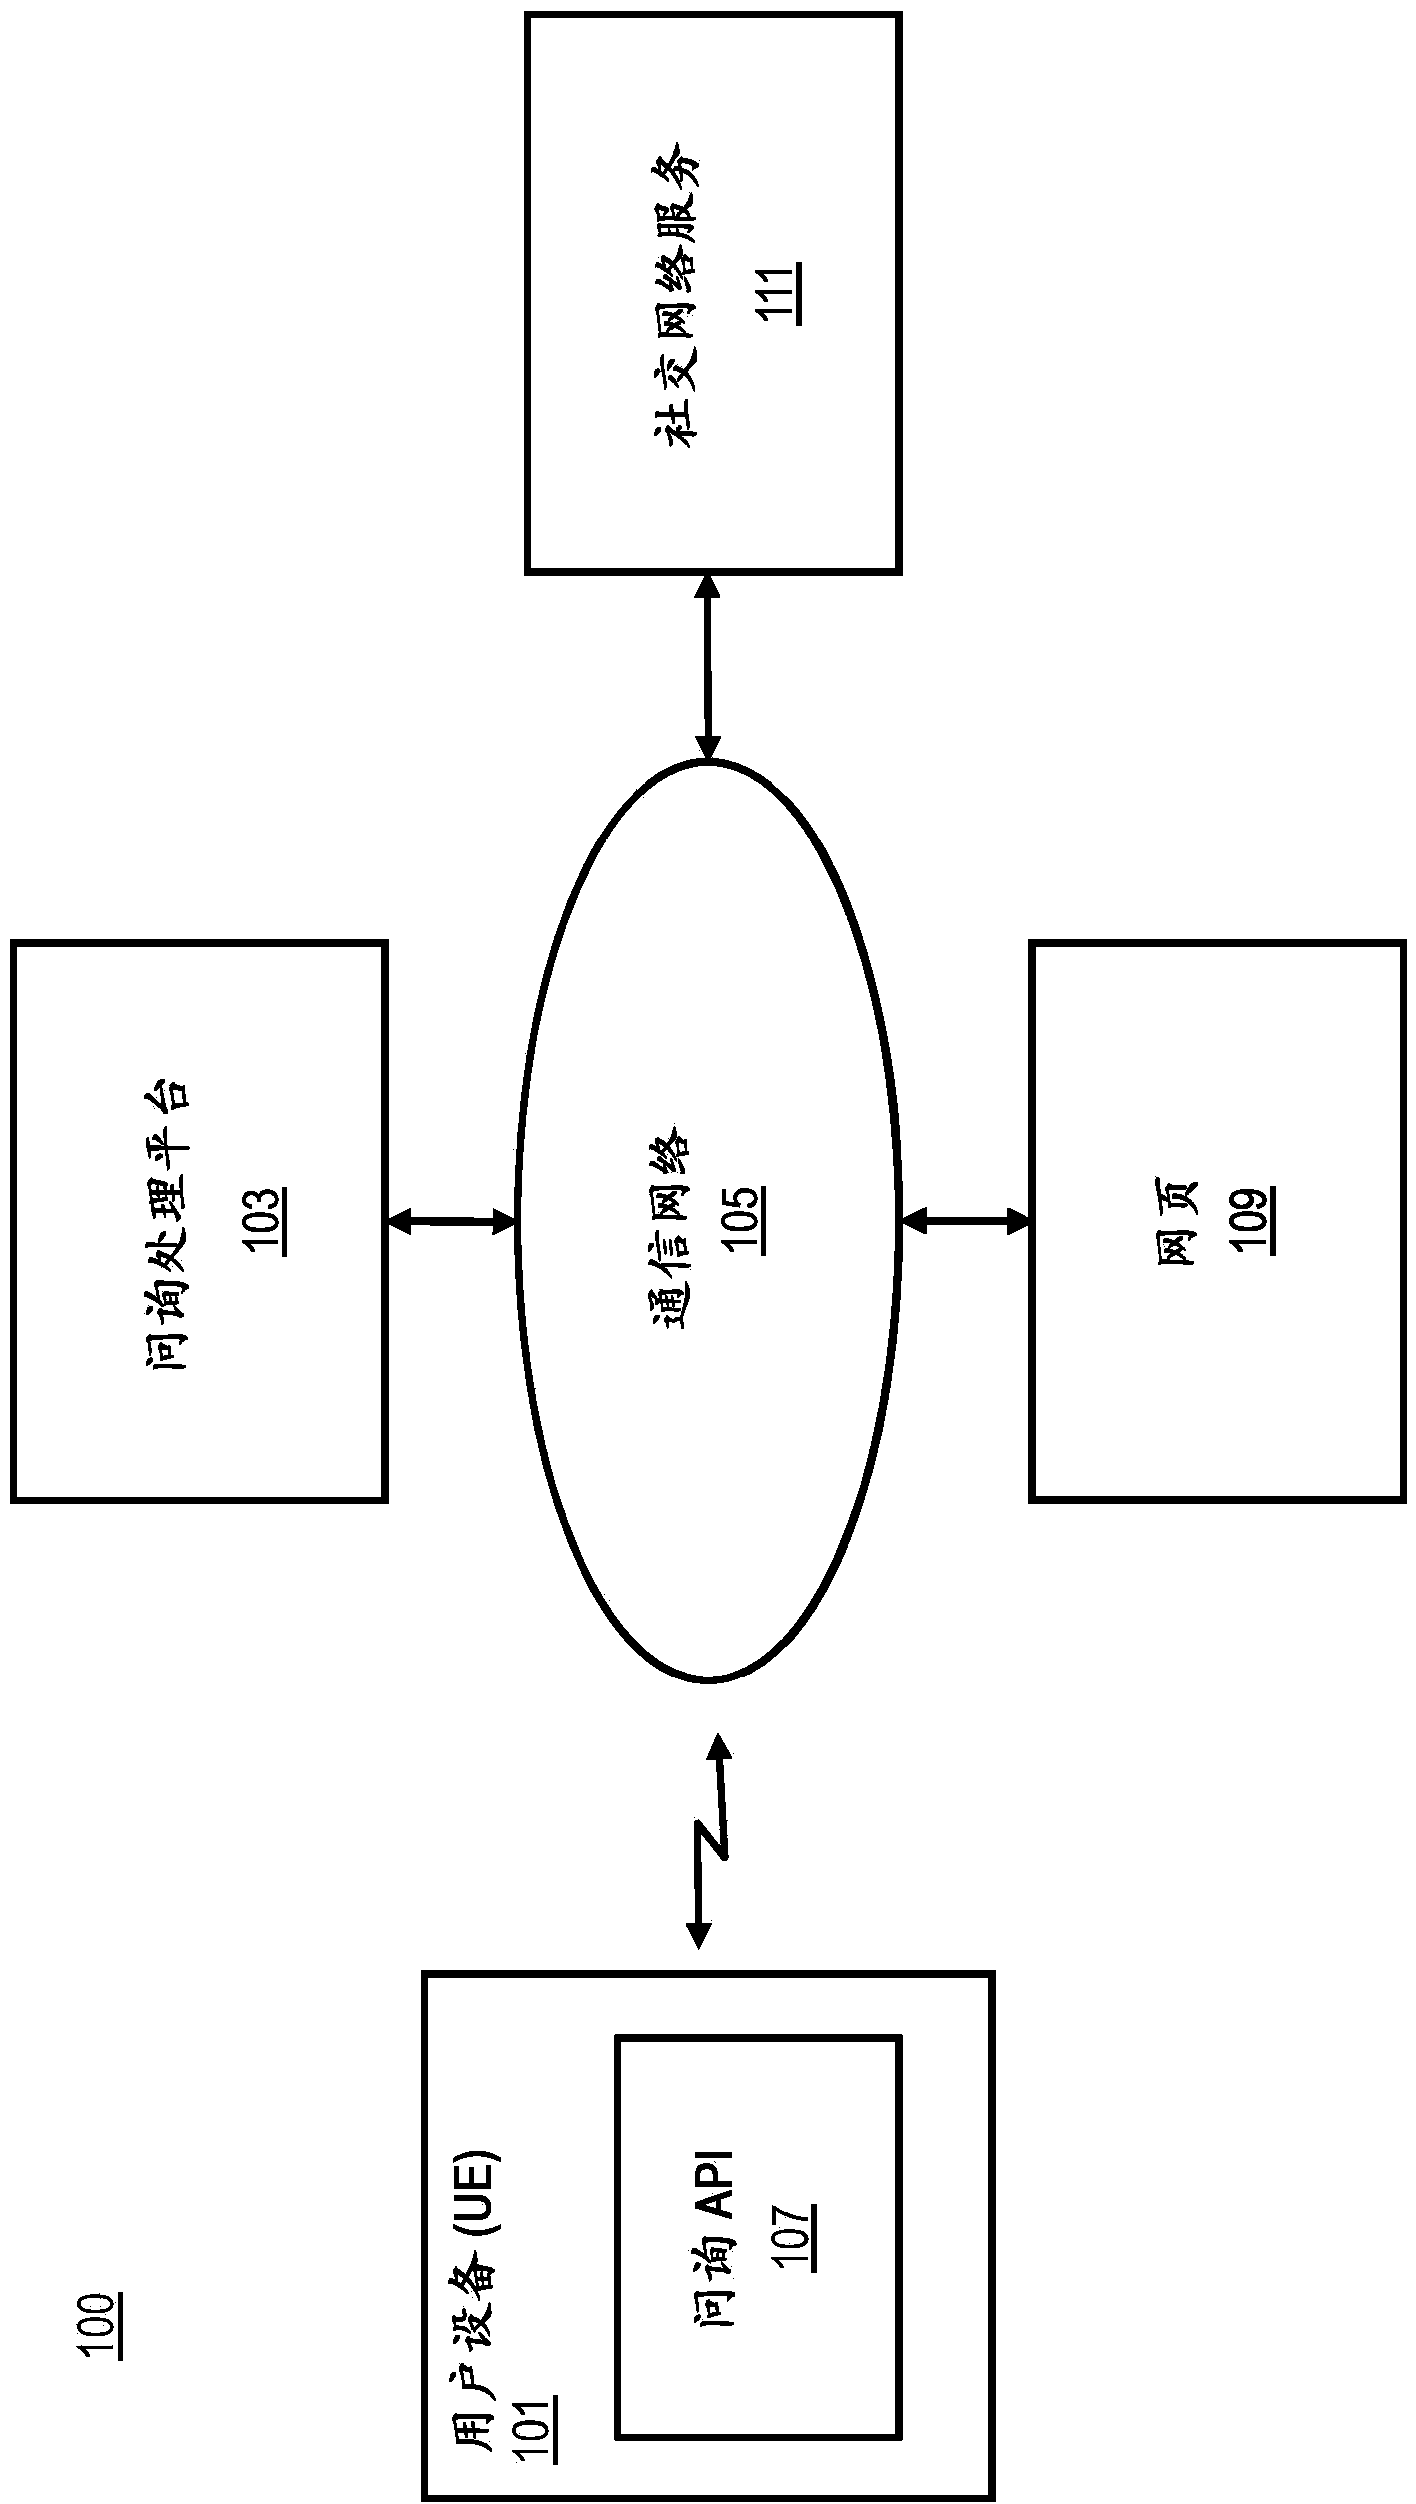 Method and apparatus for hybrid social search model